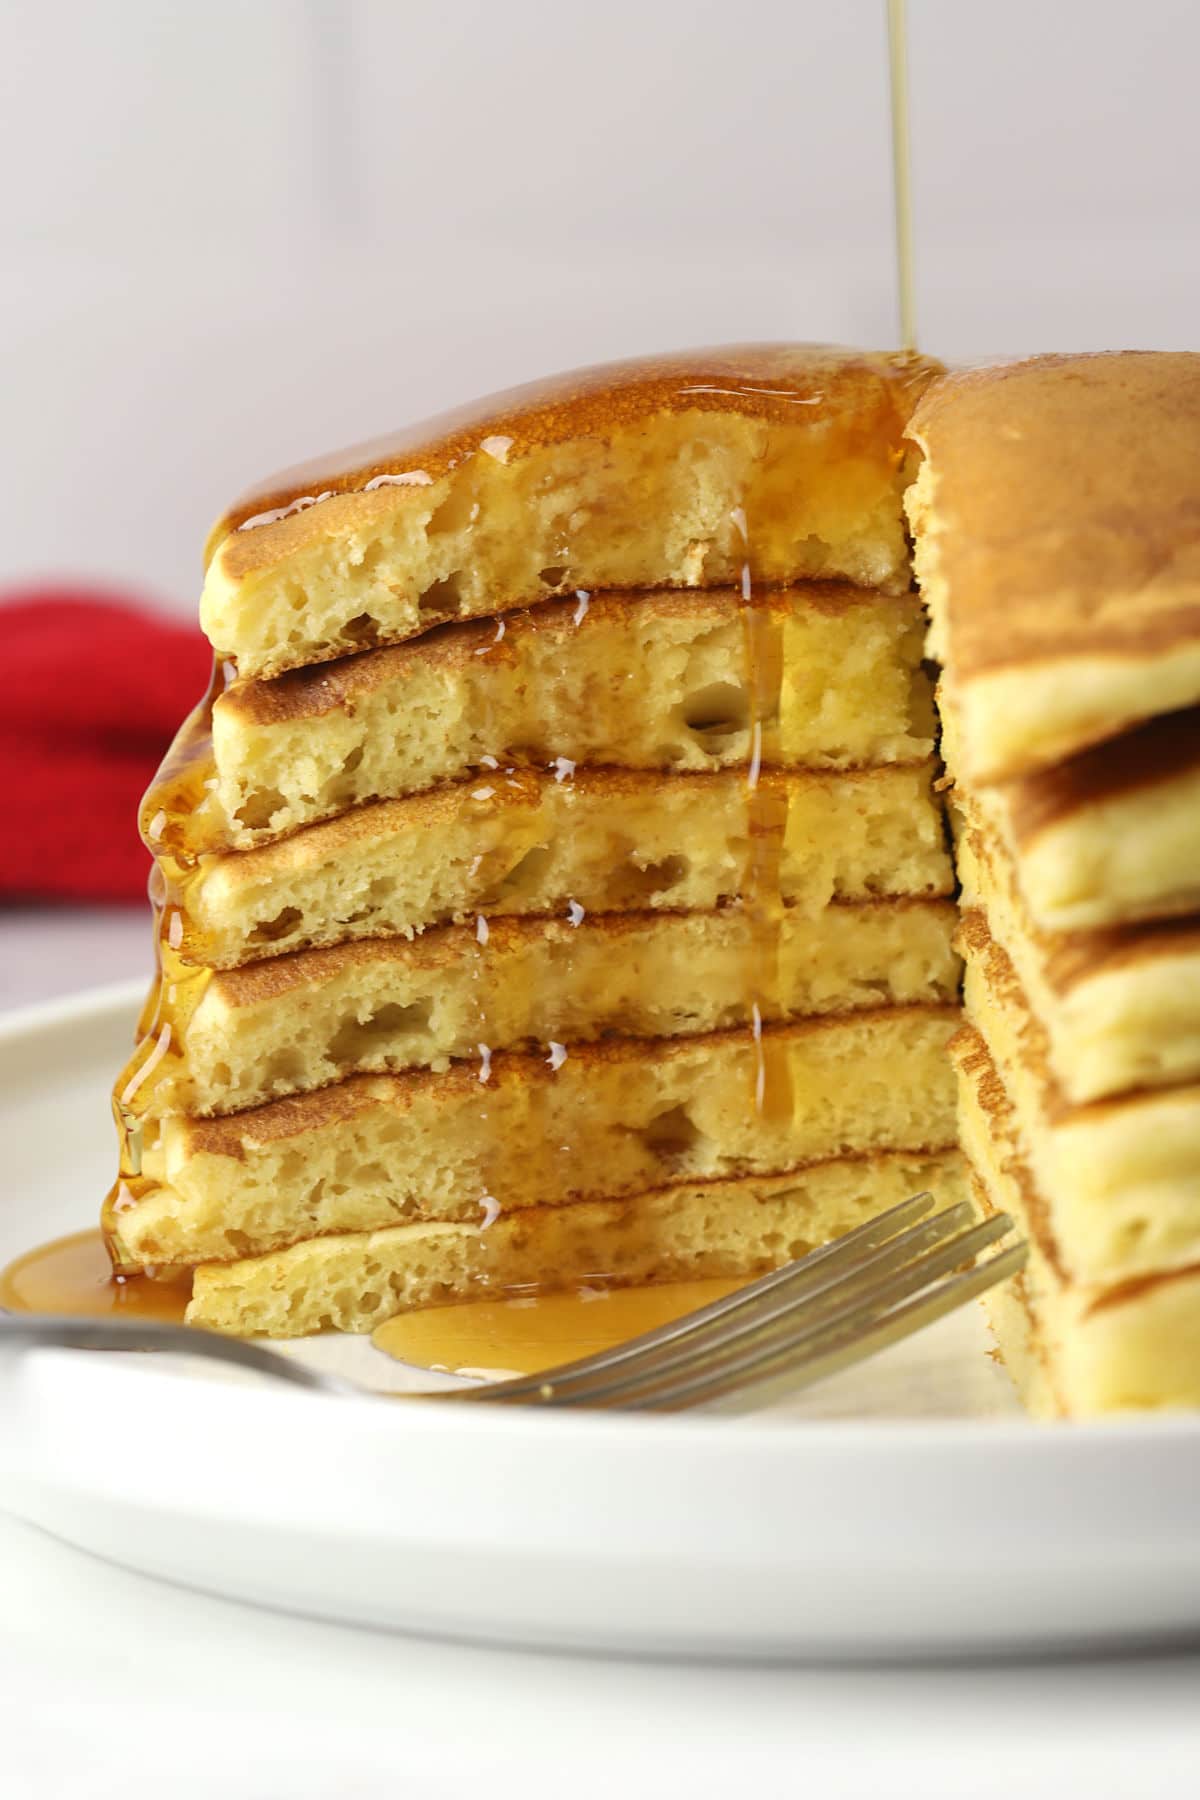 Maple syrup being poured over a stack of sliced buttermilk pancakes on a white plate.